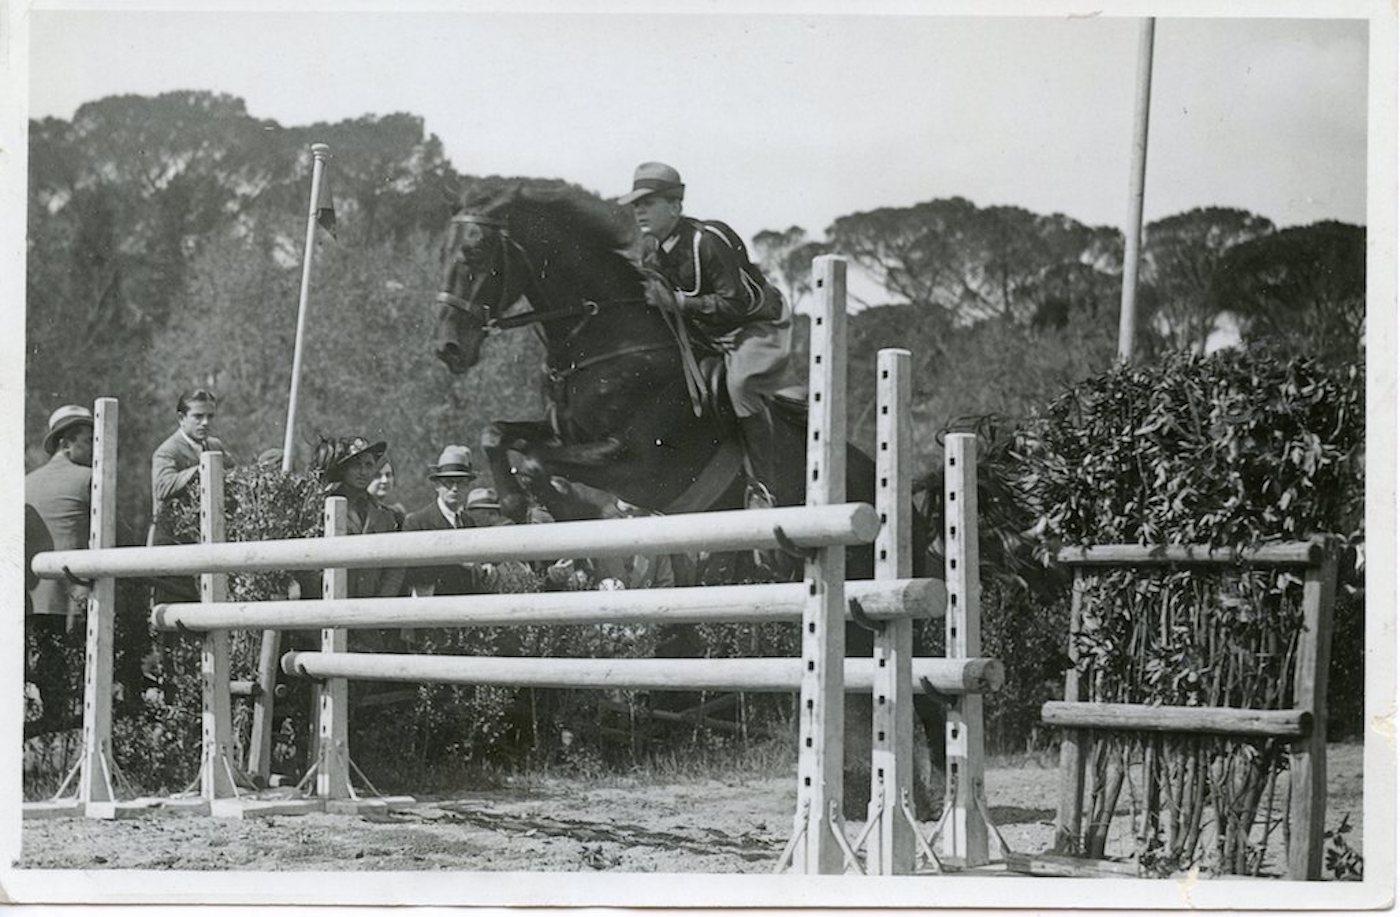 Unknown Black and White Photograph - Mussolini During a Horse Race - Vintage Photo - 1935